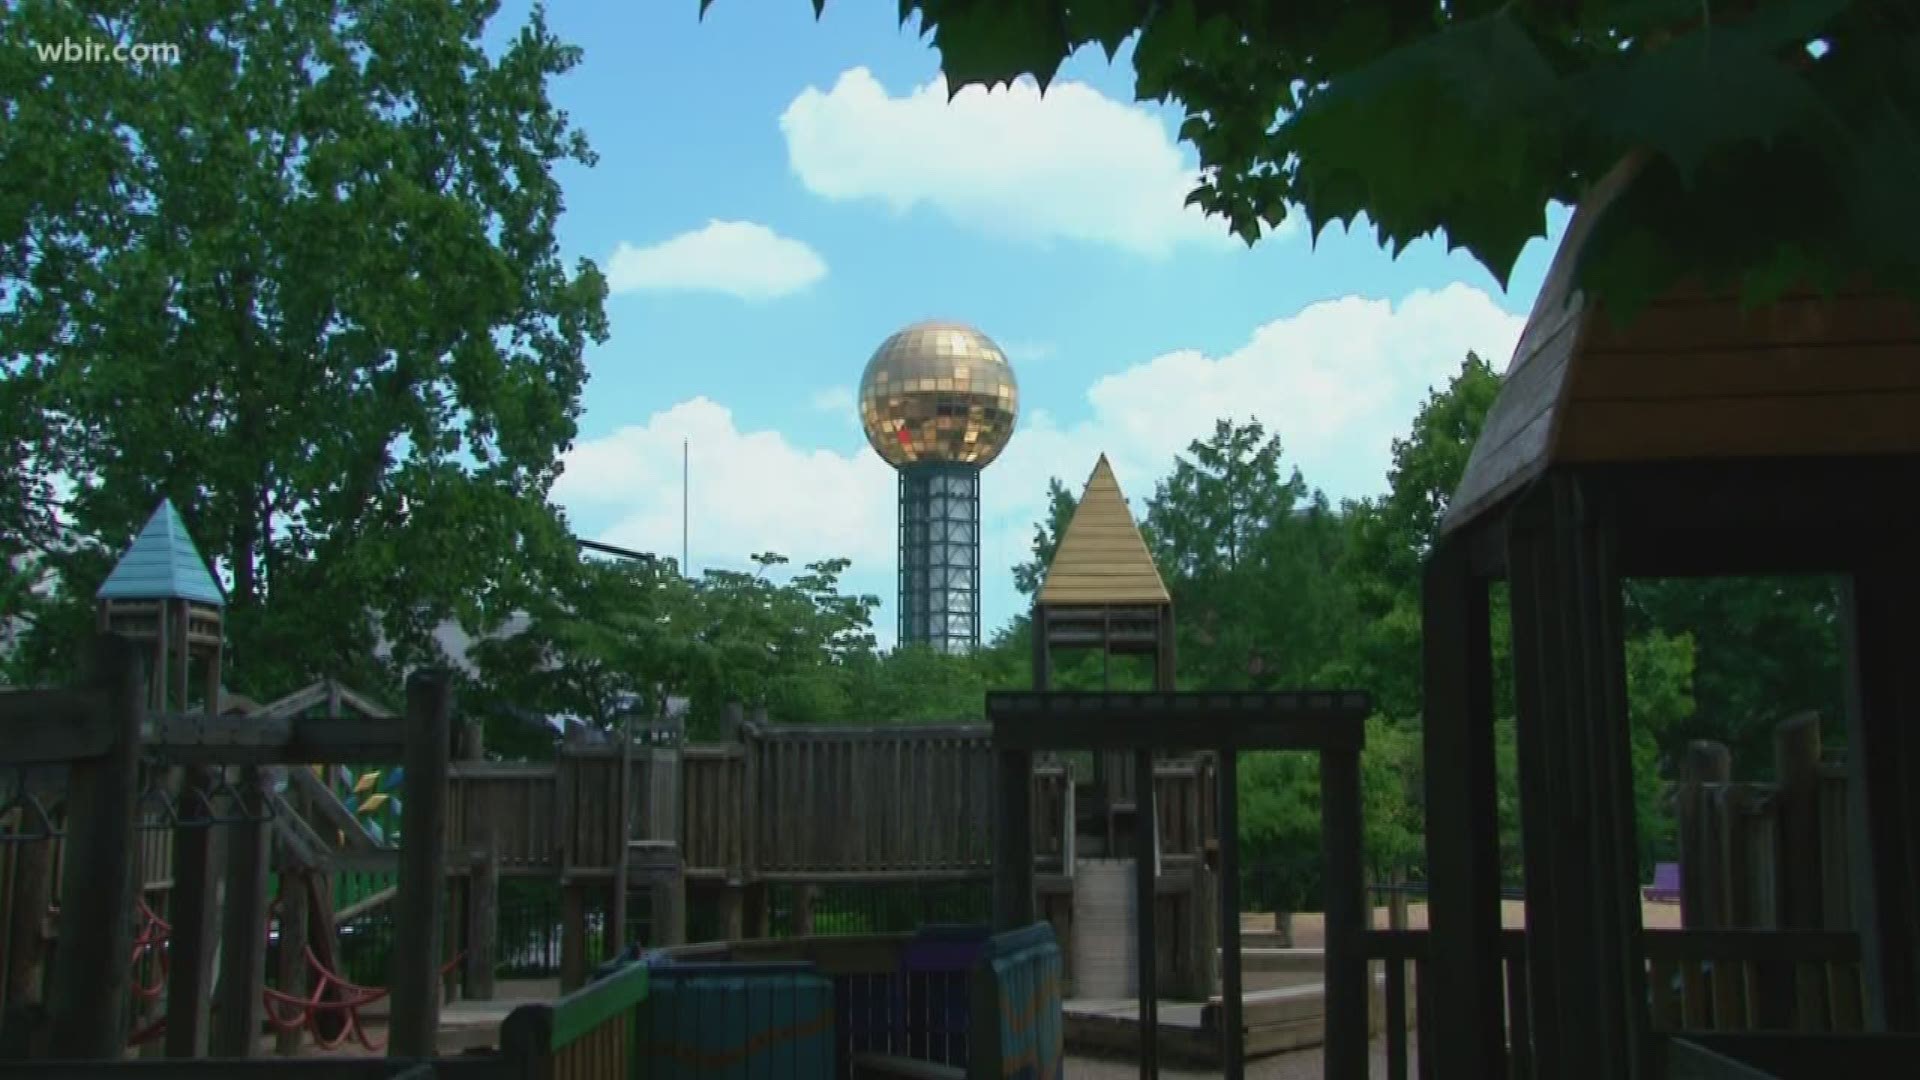 The city plans to hold a meeting Thursday to get ideas about renovating the park.